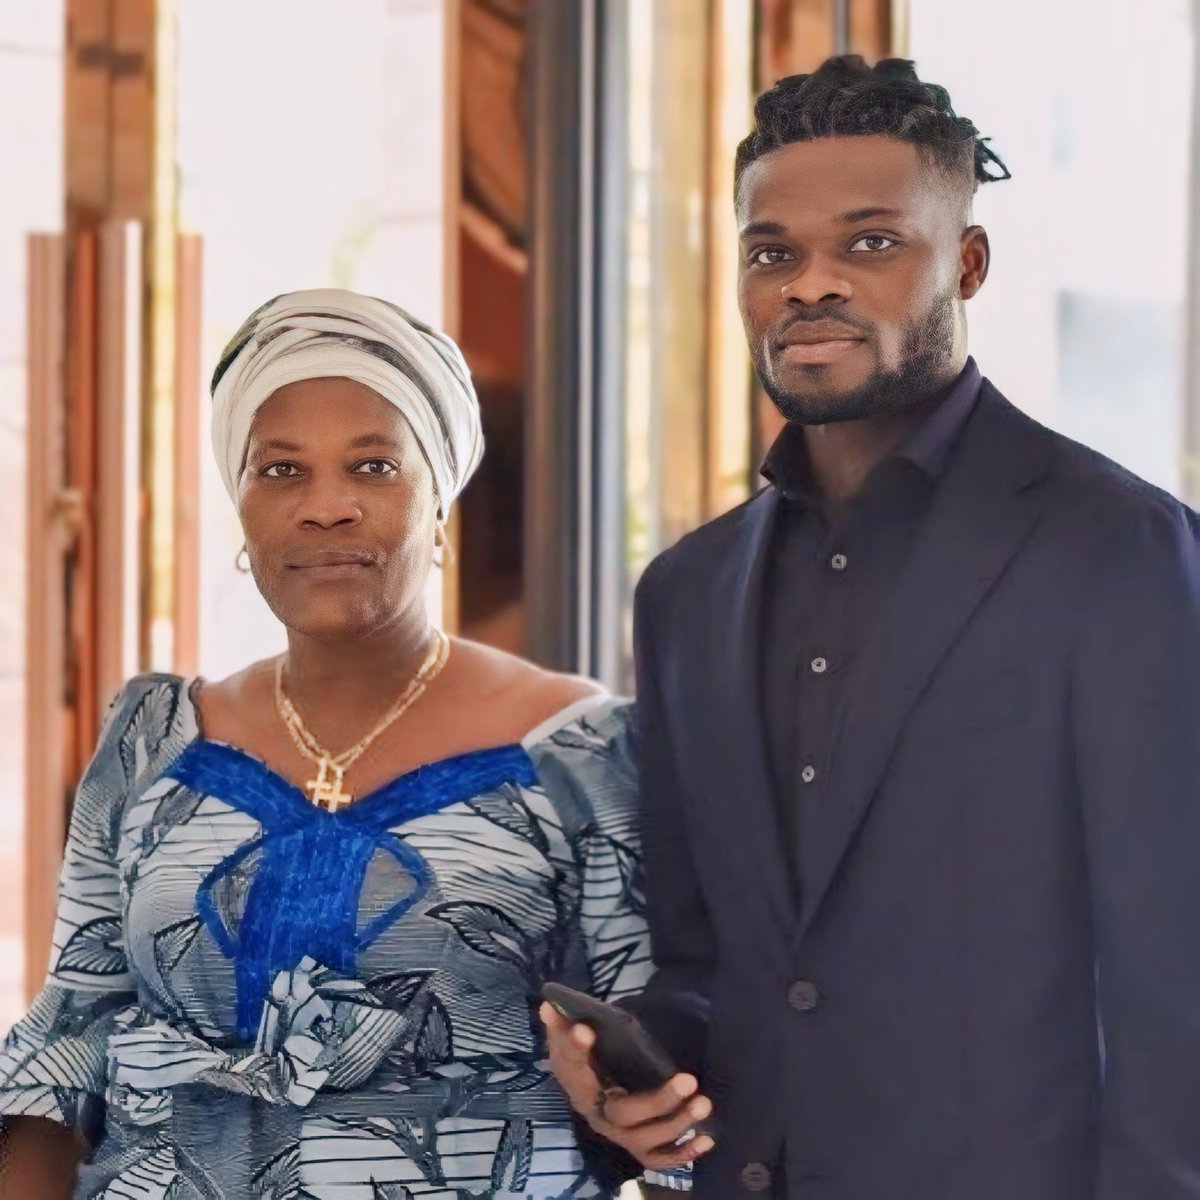 No Arsenal fan will skip this Picture of Thomas Partey and his mum without dropping a like ❤️